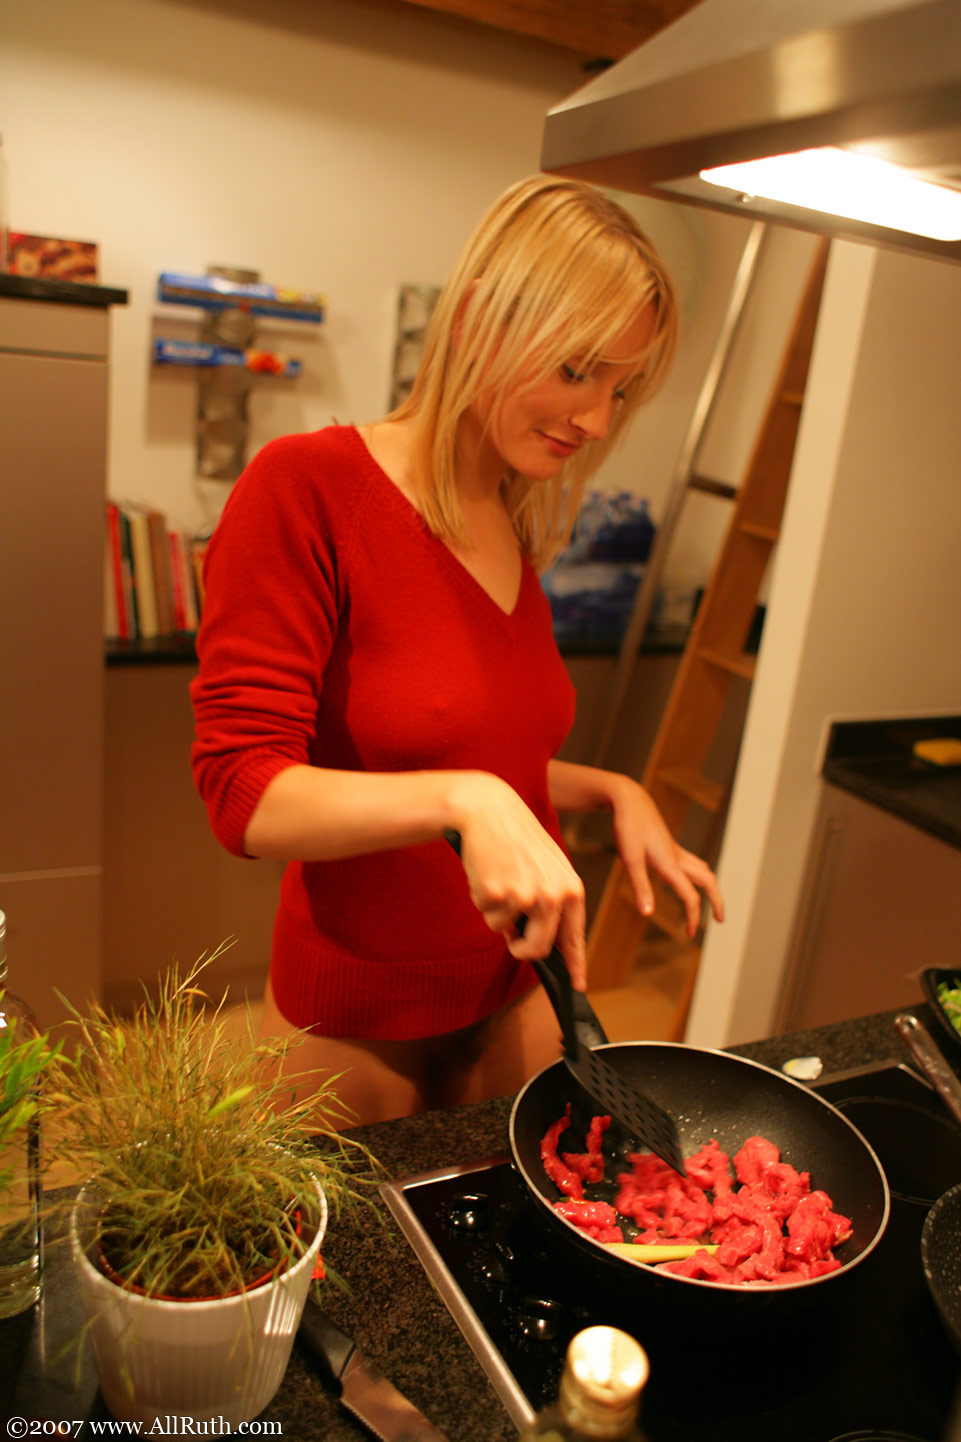 all-ruth-blonde-cooking-dinner-naked-in-kitchen-10